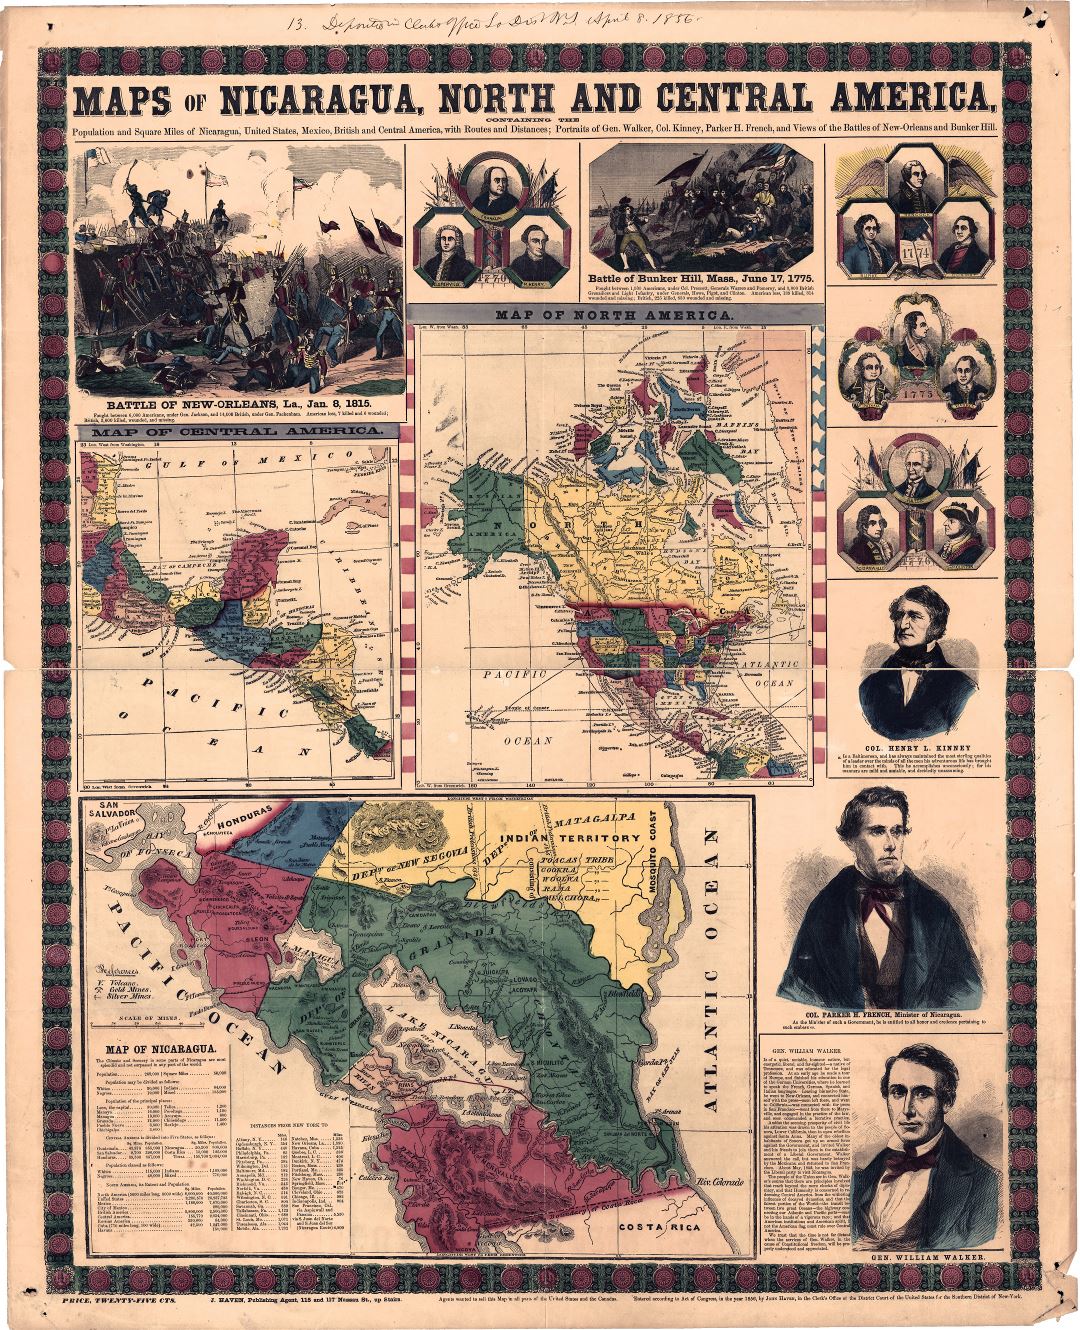 Large scale old map of Nicaragua, North and Central America - 1856